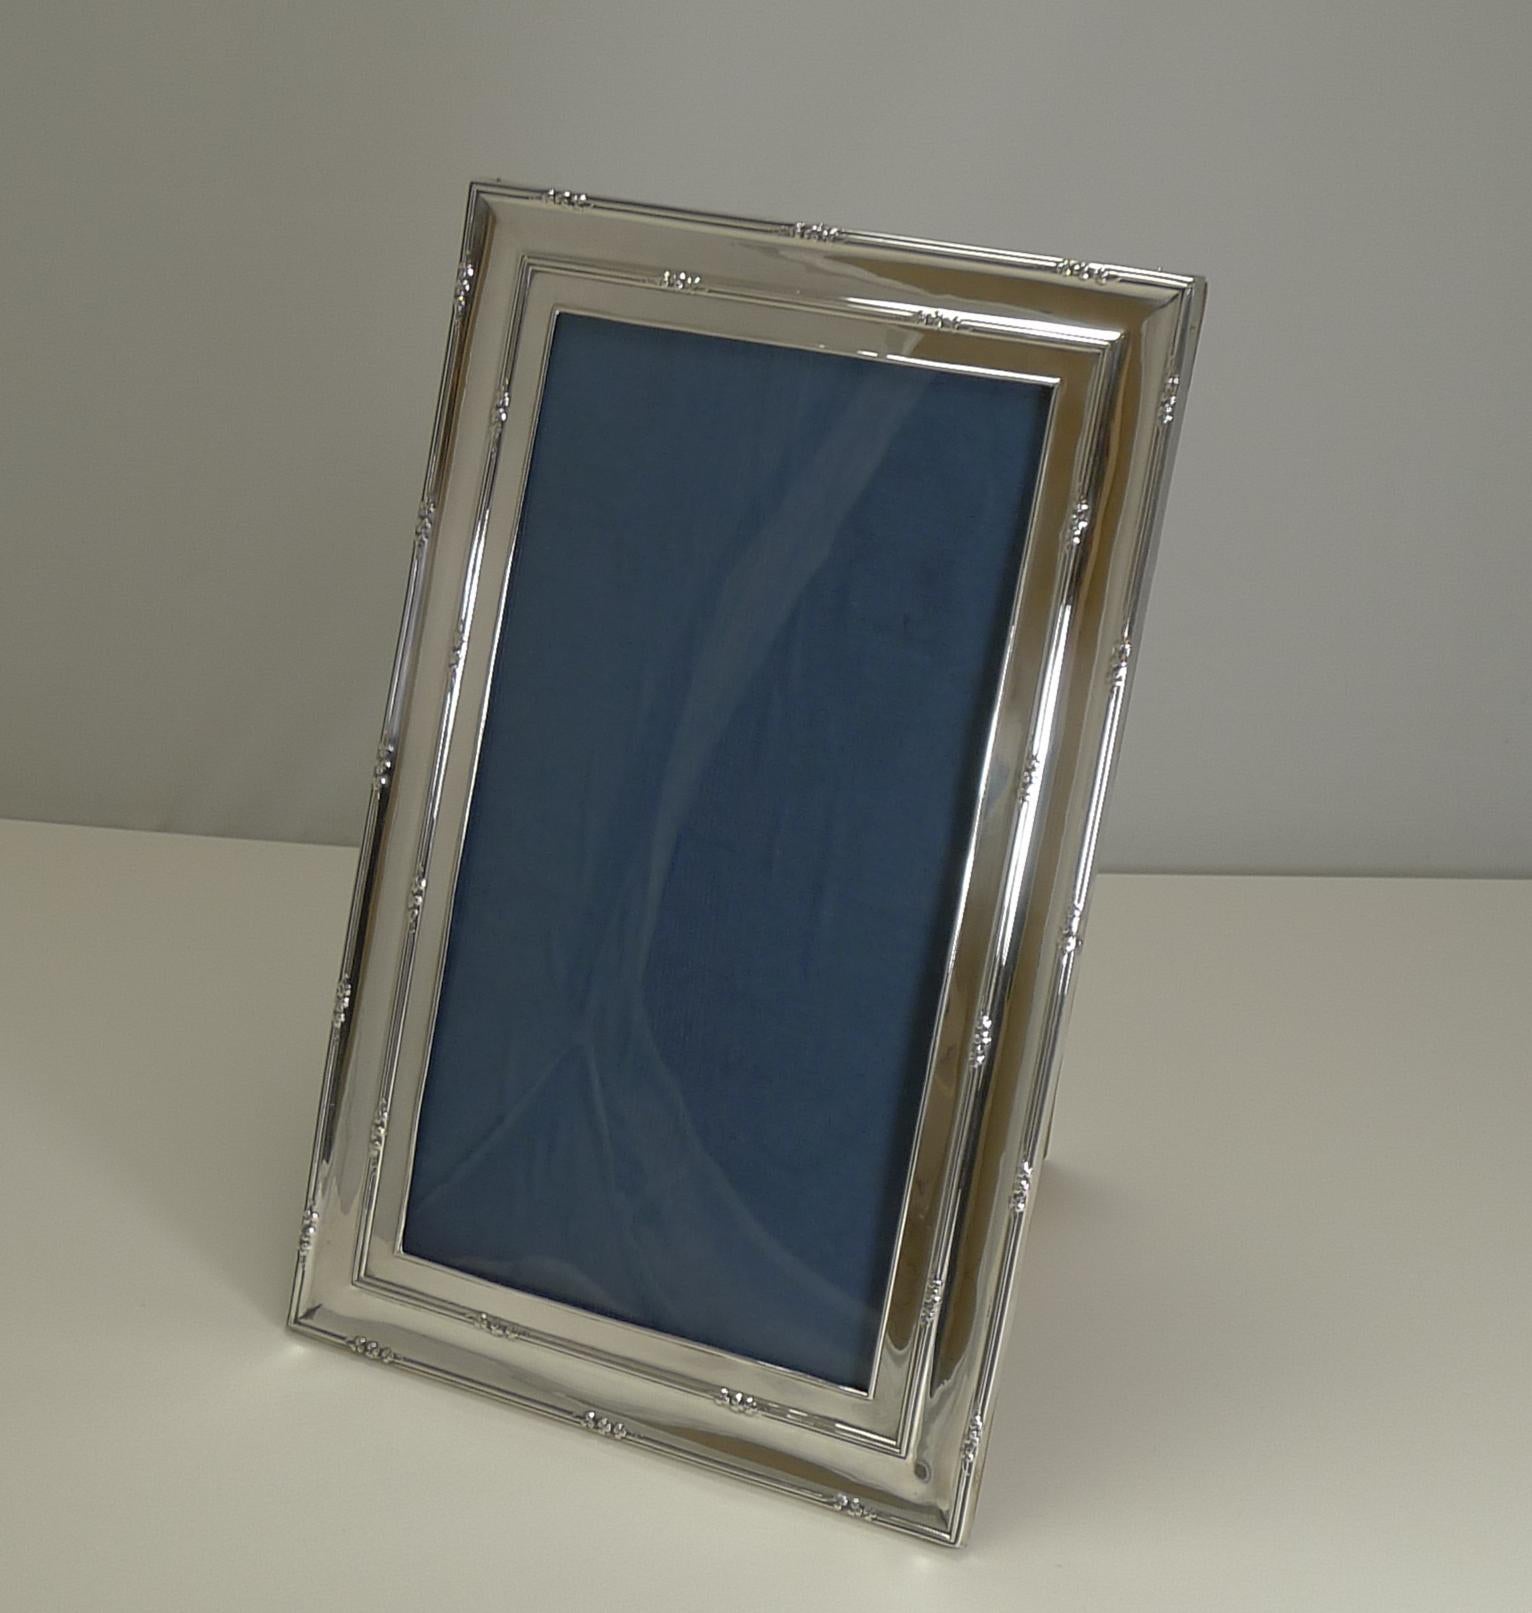 A very smart large picture frame made from English sterling silver with a solid oak backing.

What makes this a highly desirable example is the opportunity to use as both a portrait and landscape frame, versatile and very usable.

The silver is